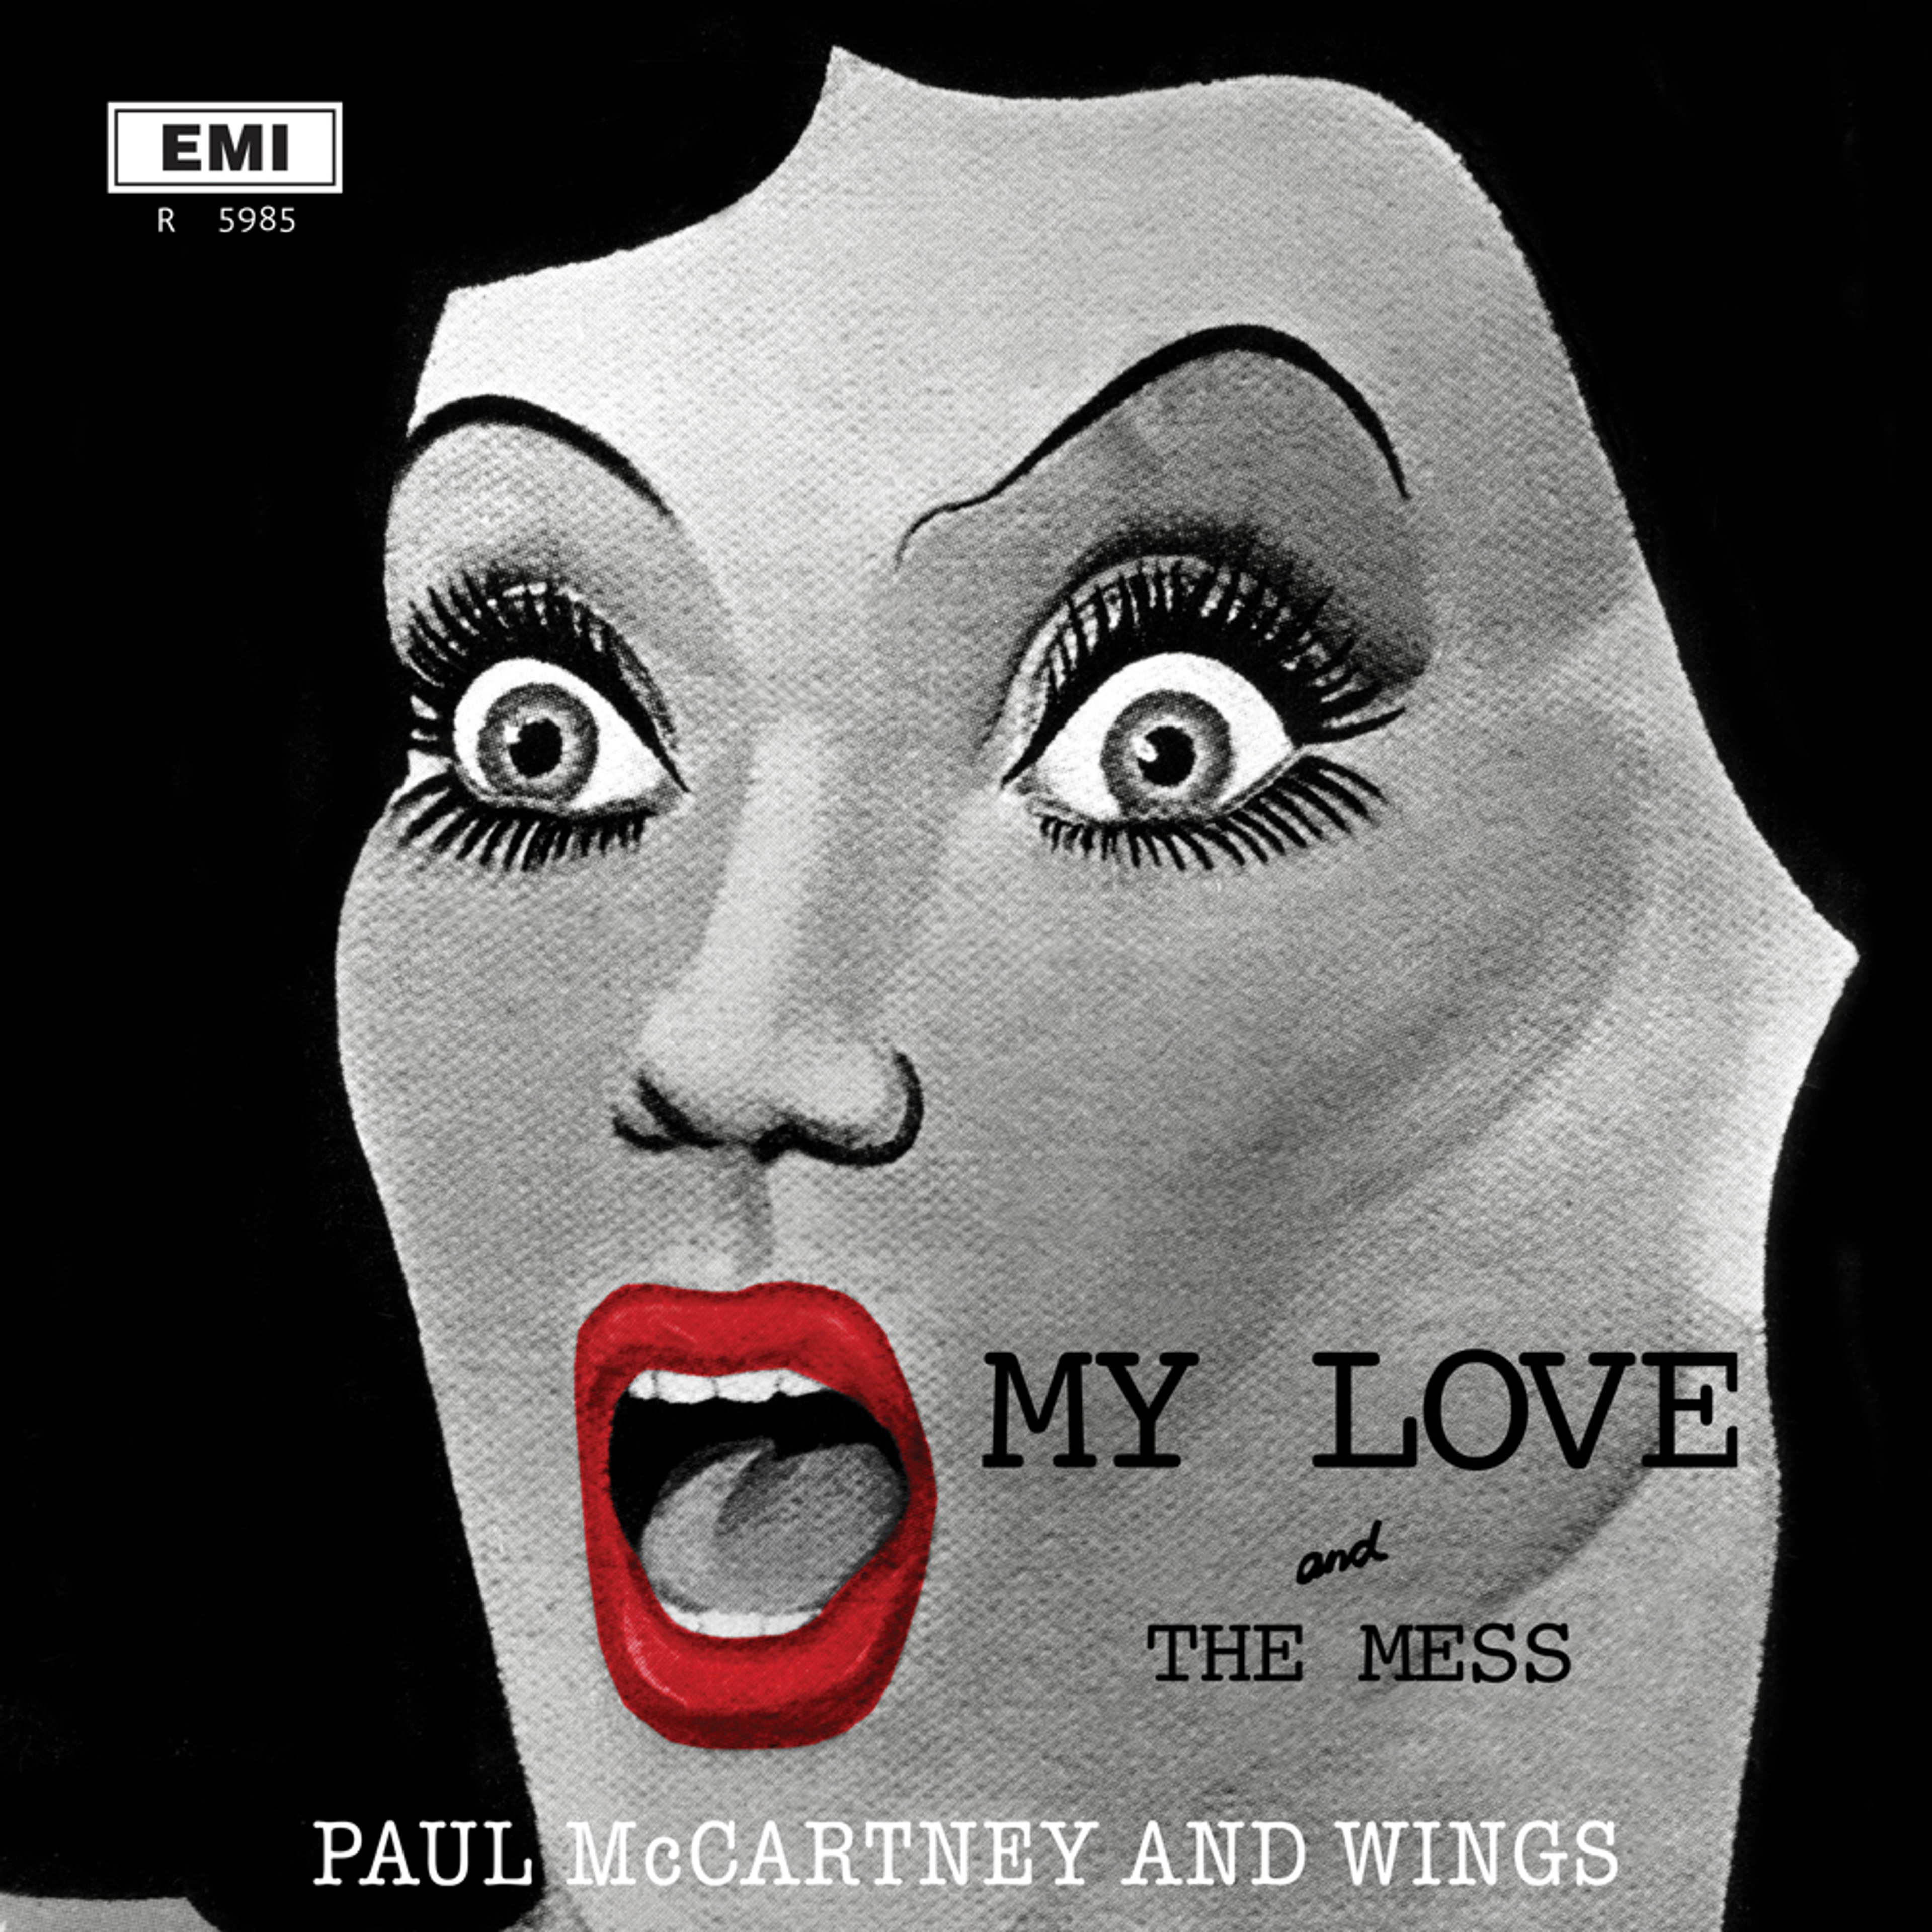 “My Love” Single artwork as featured in 'The 7" Singles Box' 